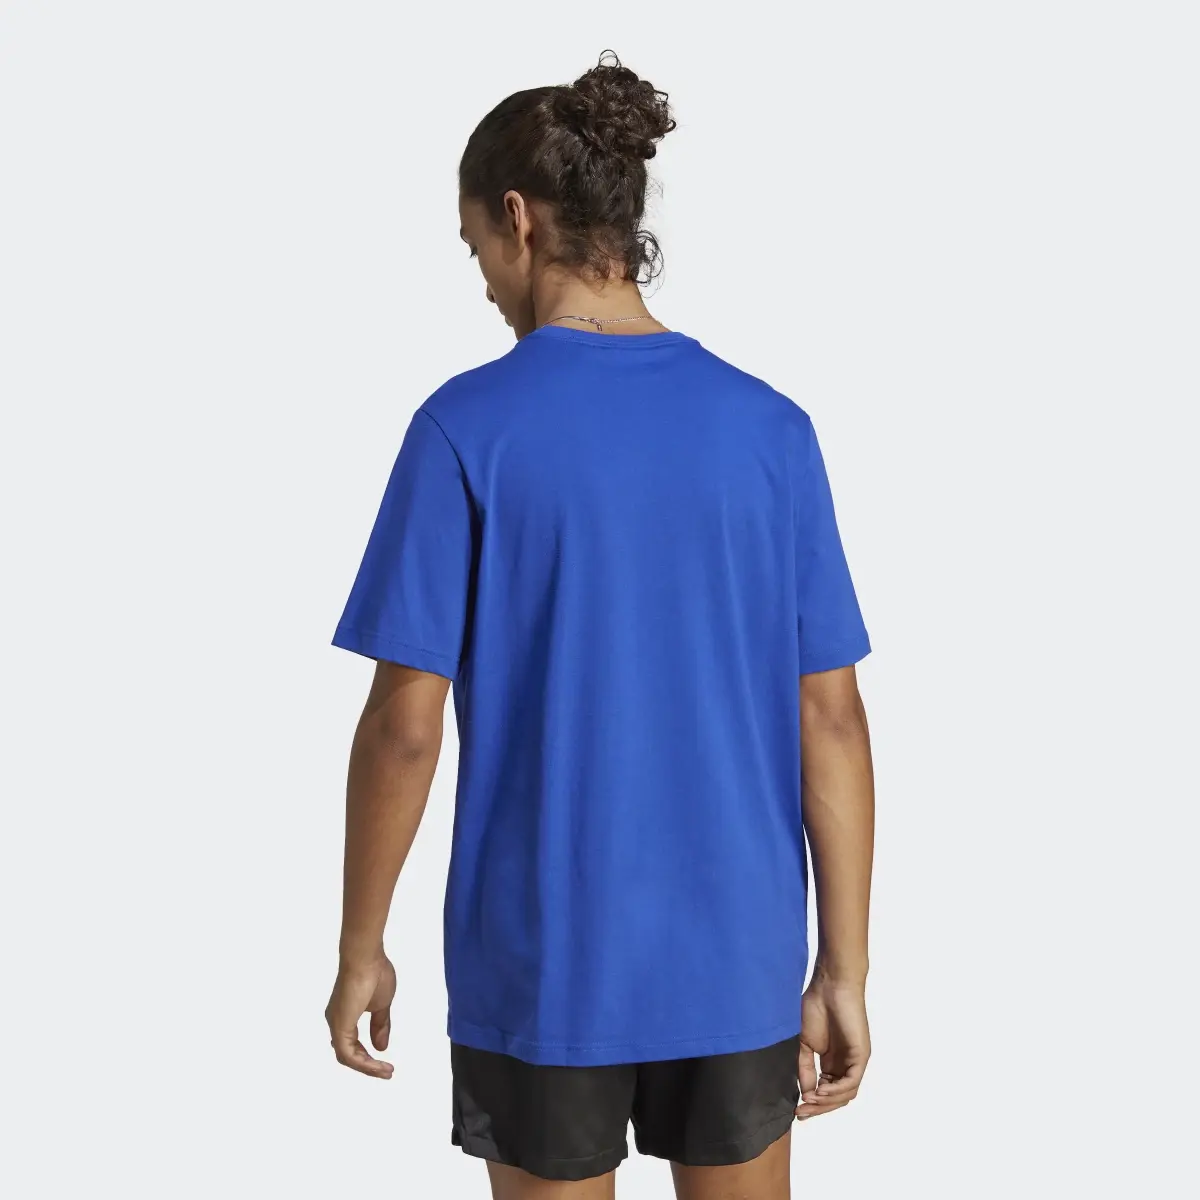 Adidas T-shirt Essentials Single Jersey Embroidered Small Logo. 3